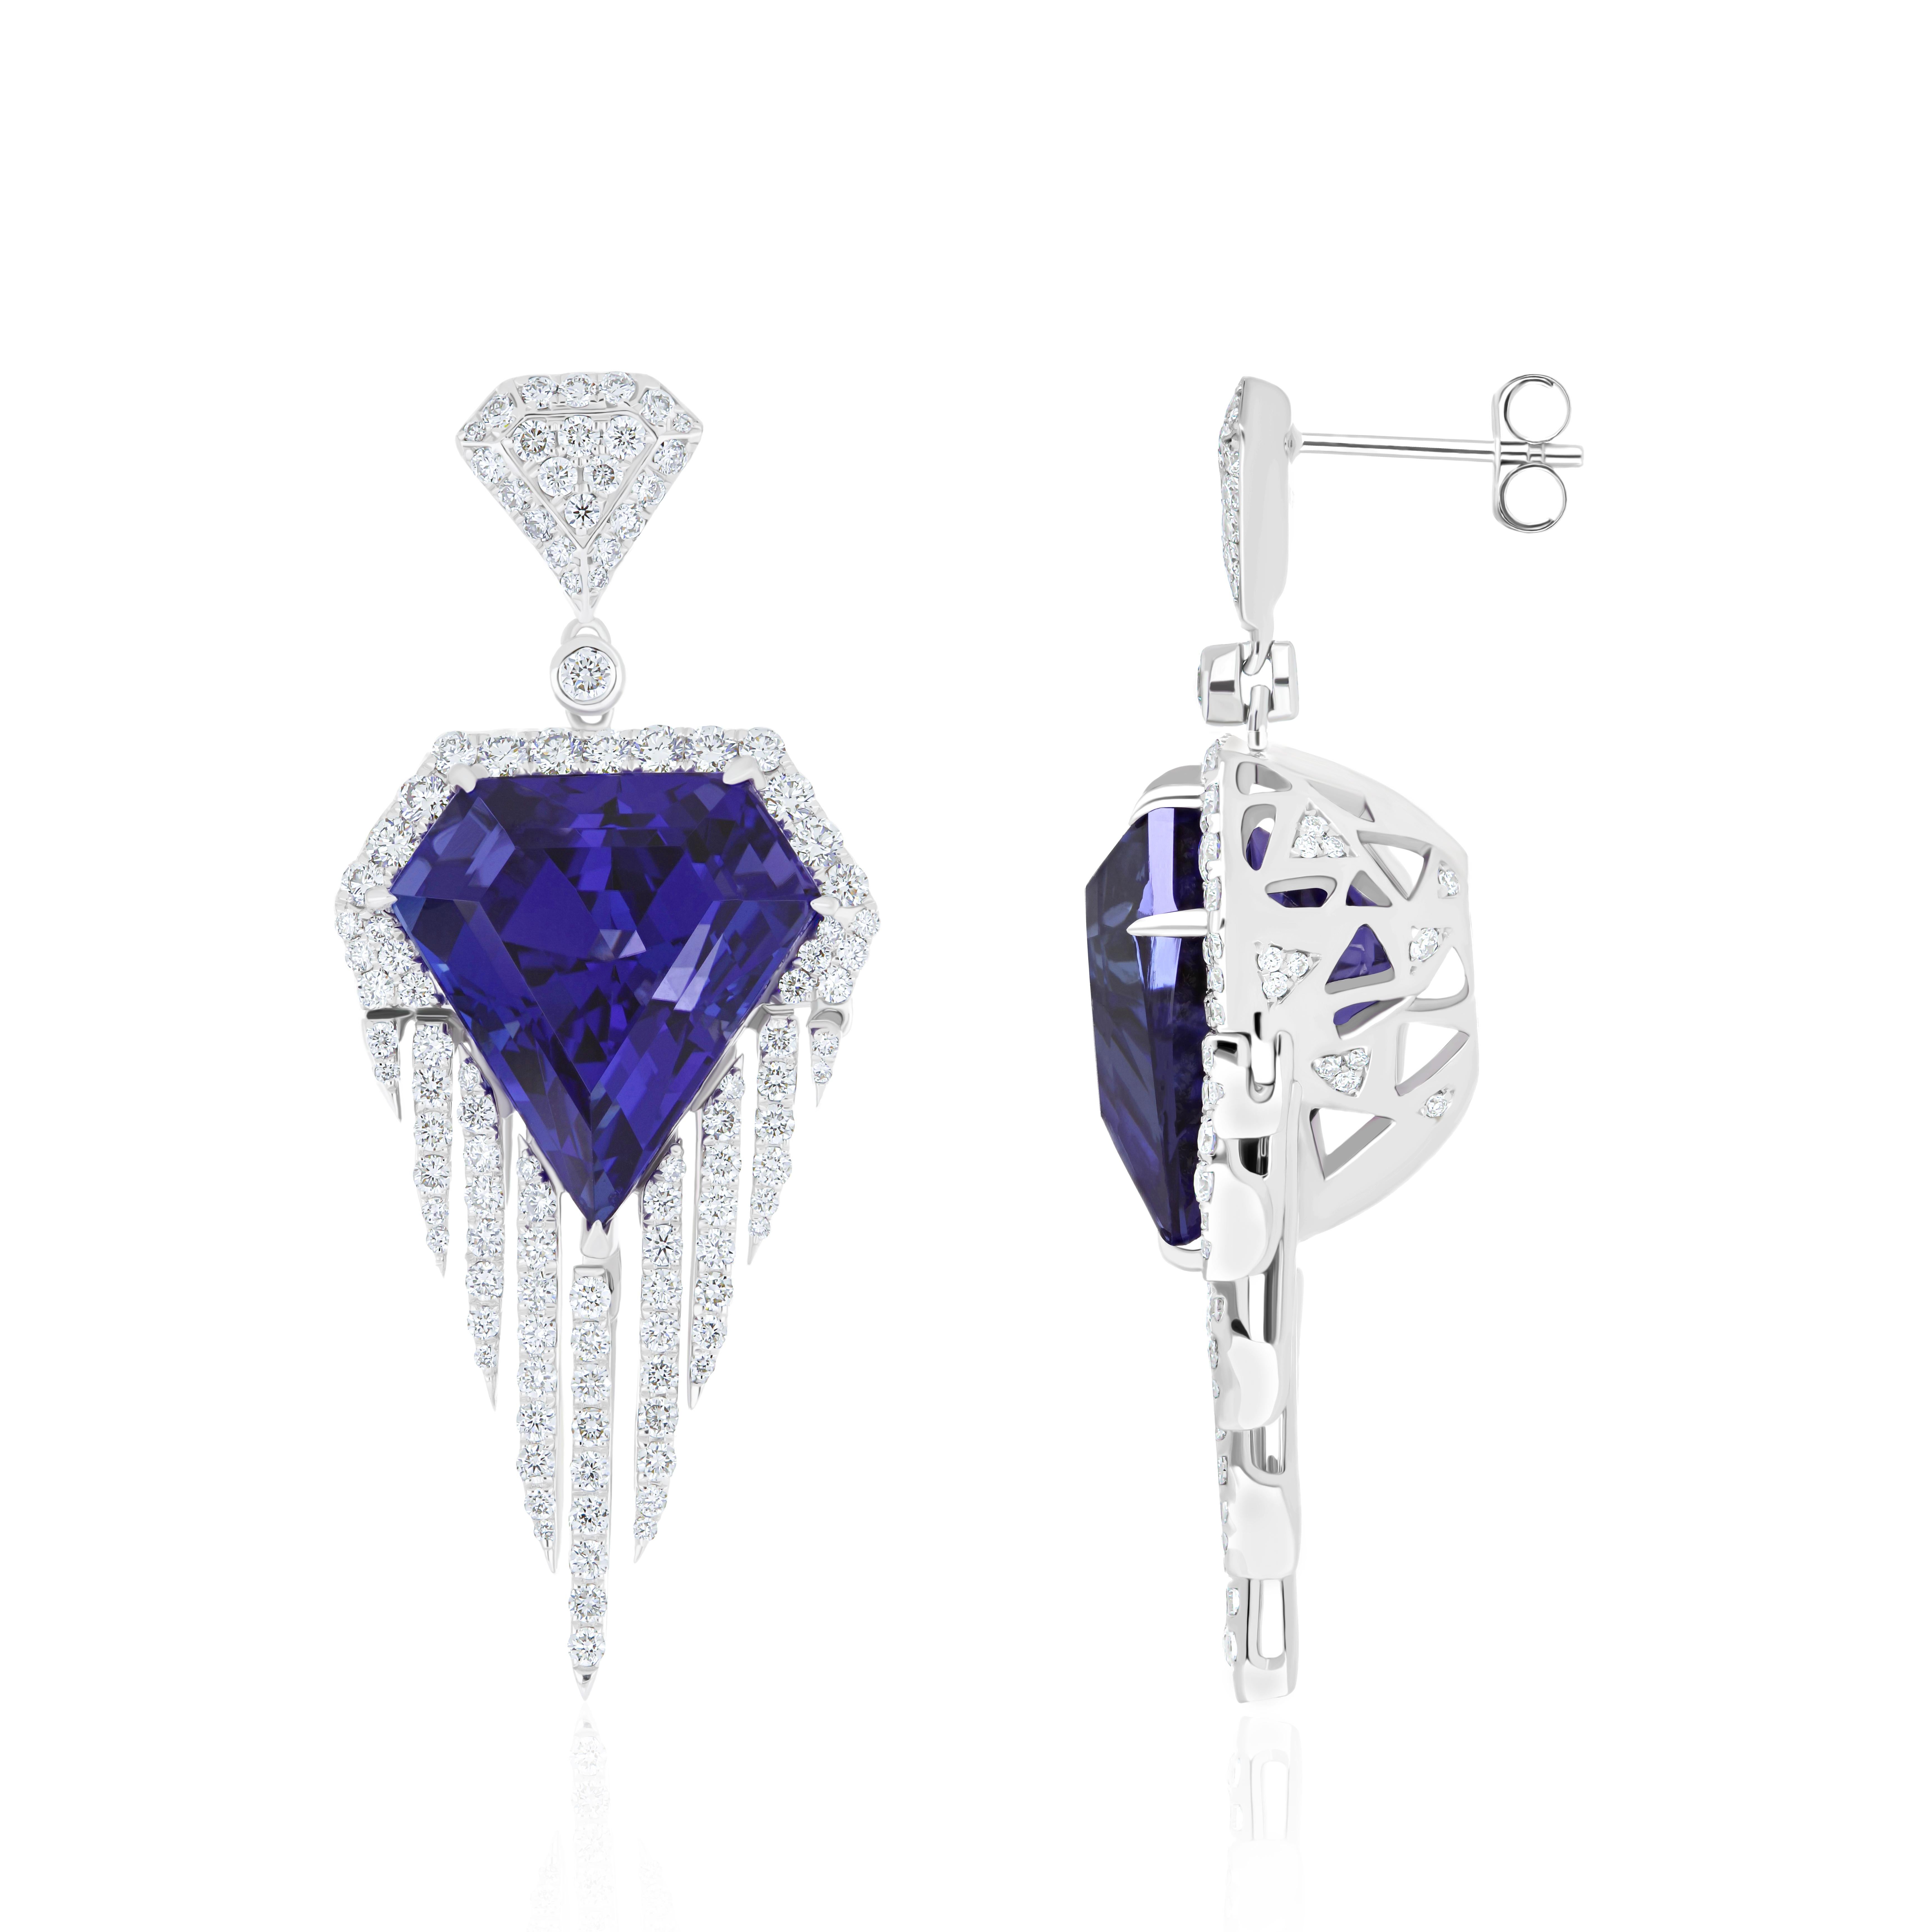 Elegant and Exquisitely detailed White Gold Earring, with 27.0 Cts (approx) Tanzanite Exquisitely cut in Unique Diamond Shape accented with micro pave Diamonds, weighing approx. 2.45 Cts (approx). total carat weight. Beautifully Hand-Crafted Earring